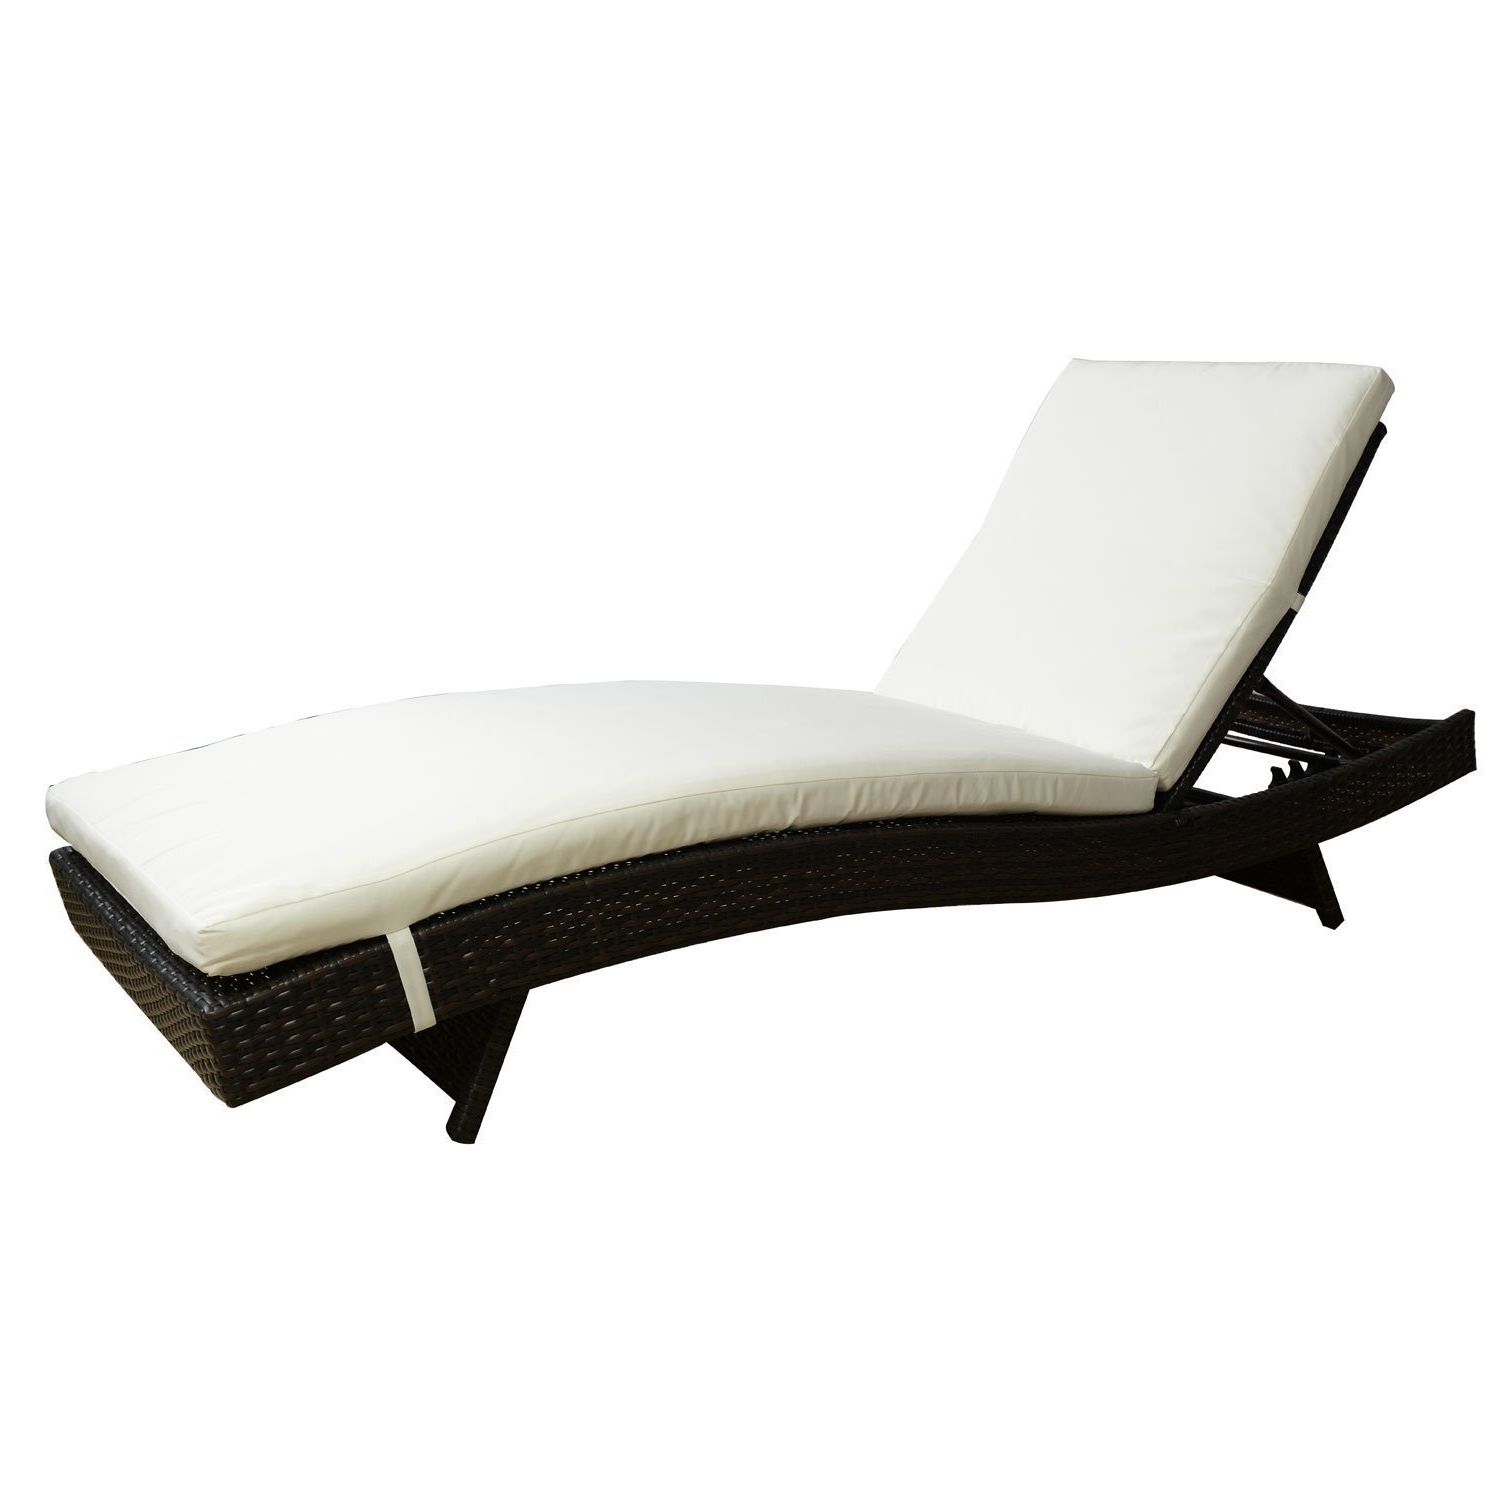 Amazon: Tangkula Adjustable Pool Chaise Lounge Chair Outdoor For Most Recent Keter Chaise Lounge Chairs (View 15 of 15)